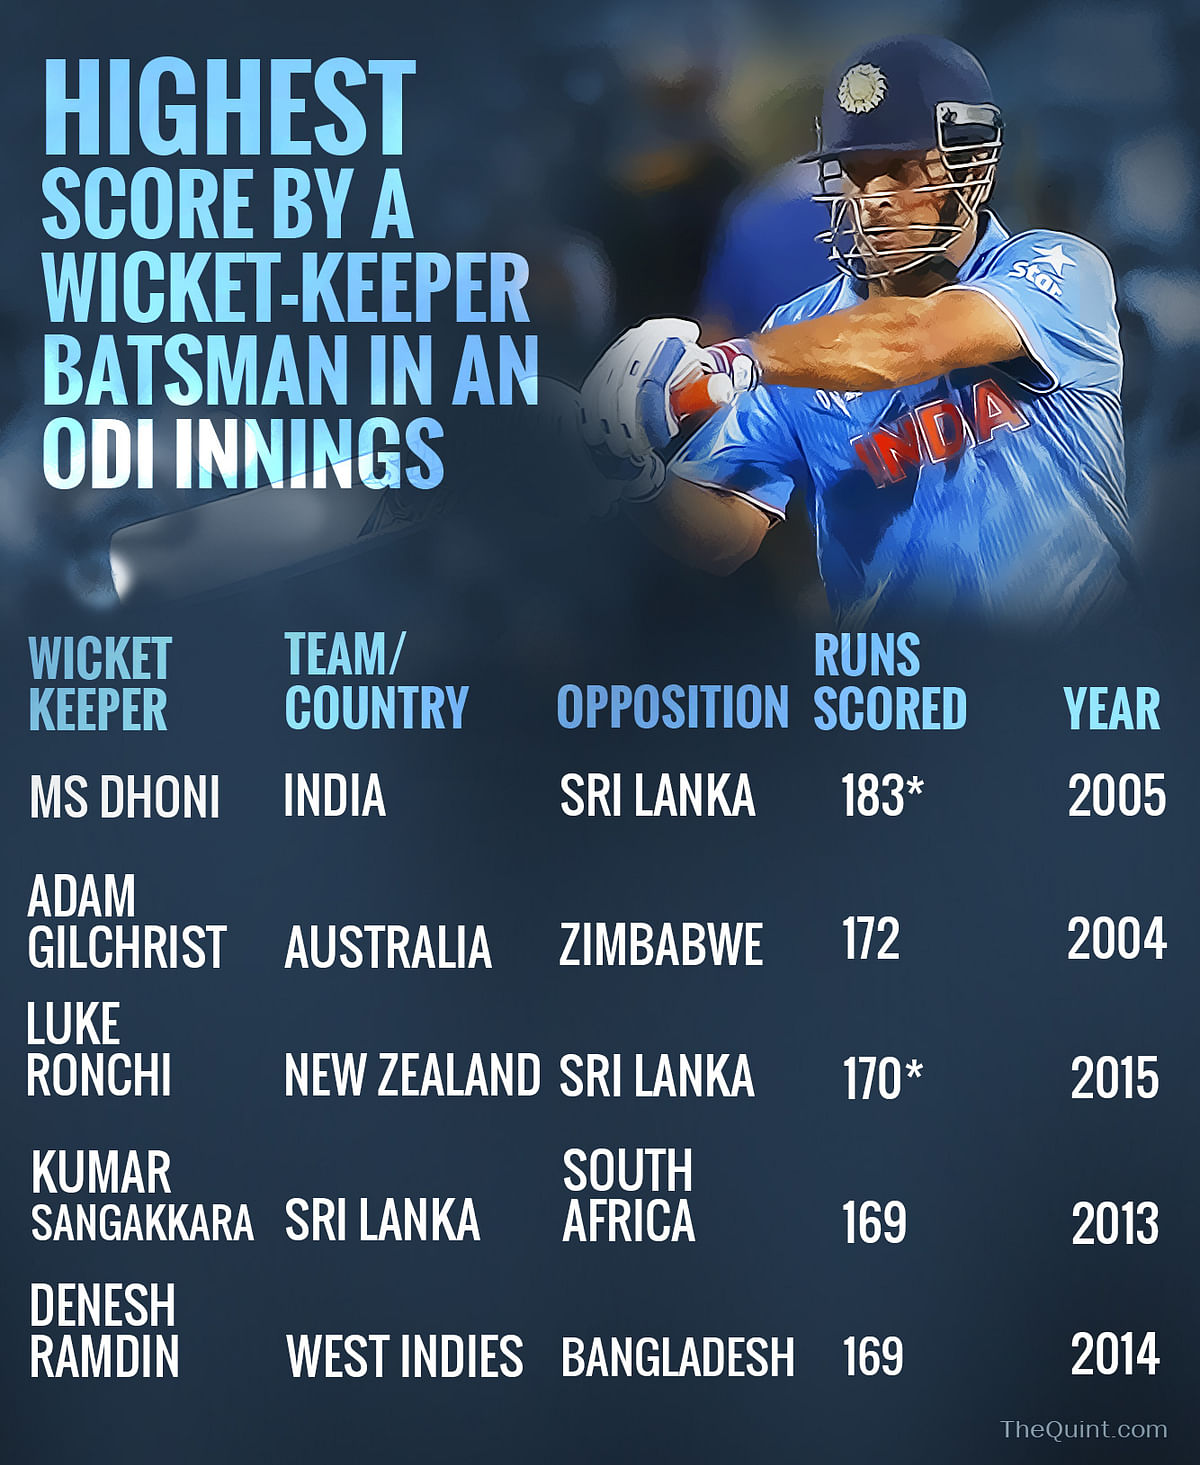 The Quint takes a look at seven interesting records held by MS Dhoni in international cricket on his 35th birthday.